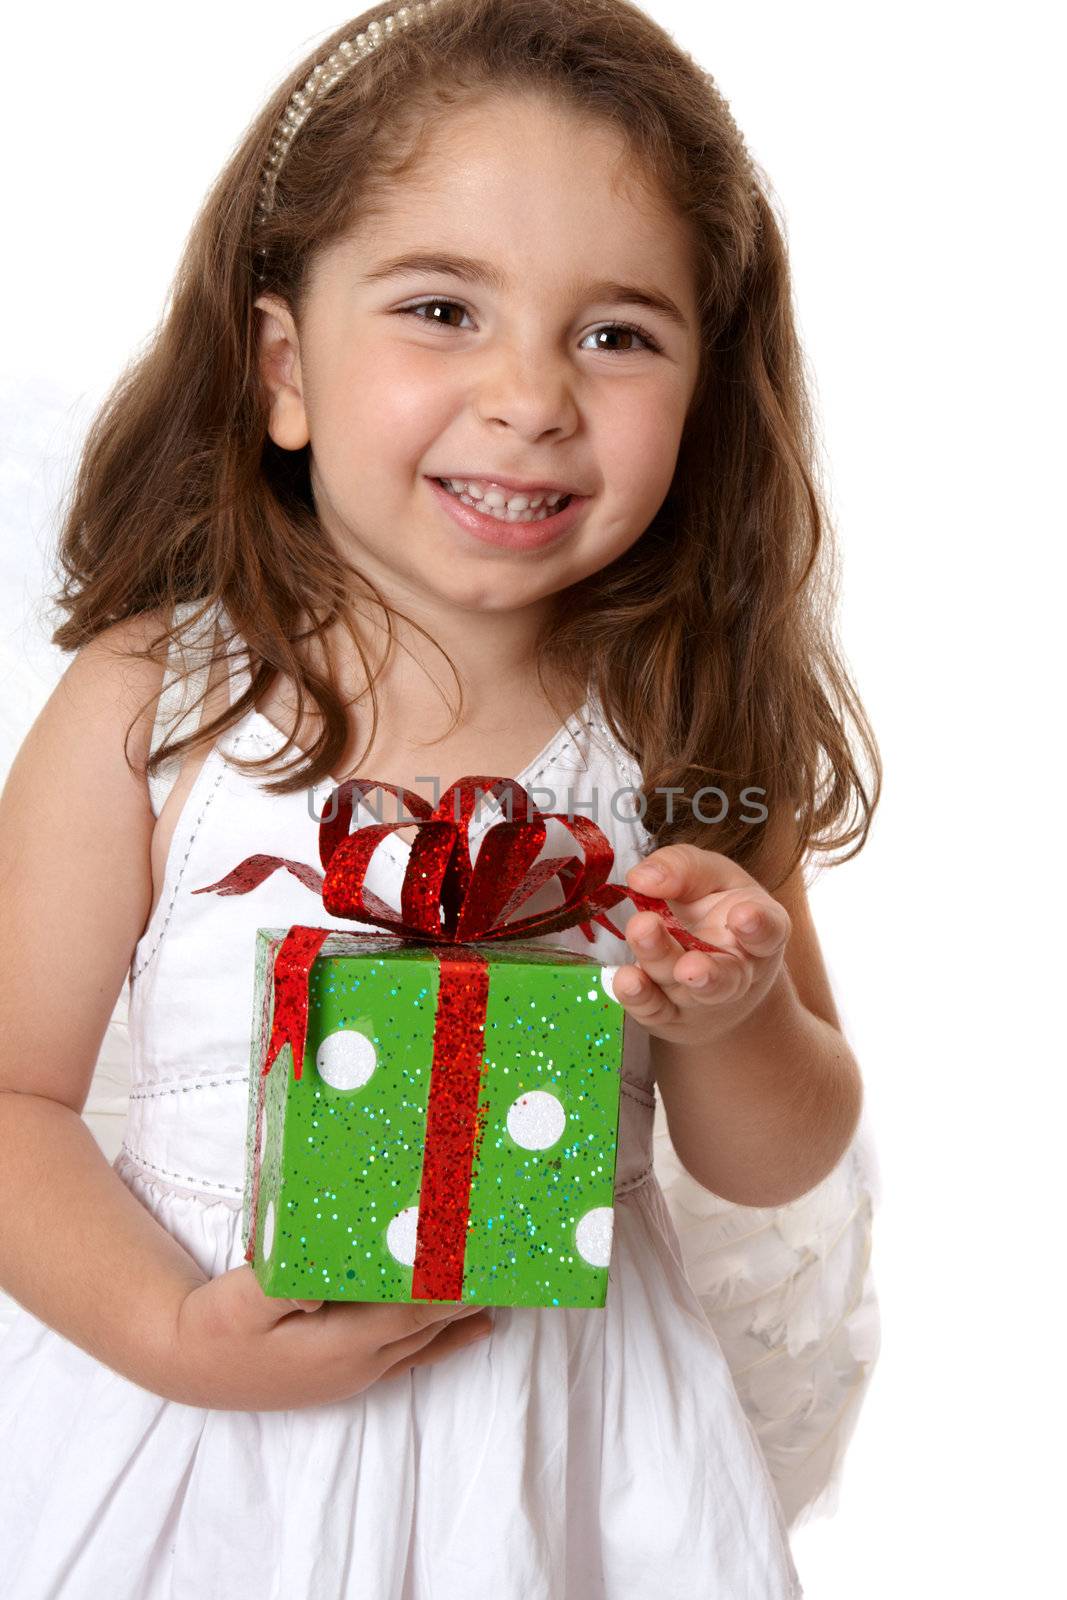 Pretty little girl holding a present and smiling.   